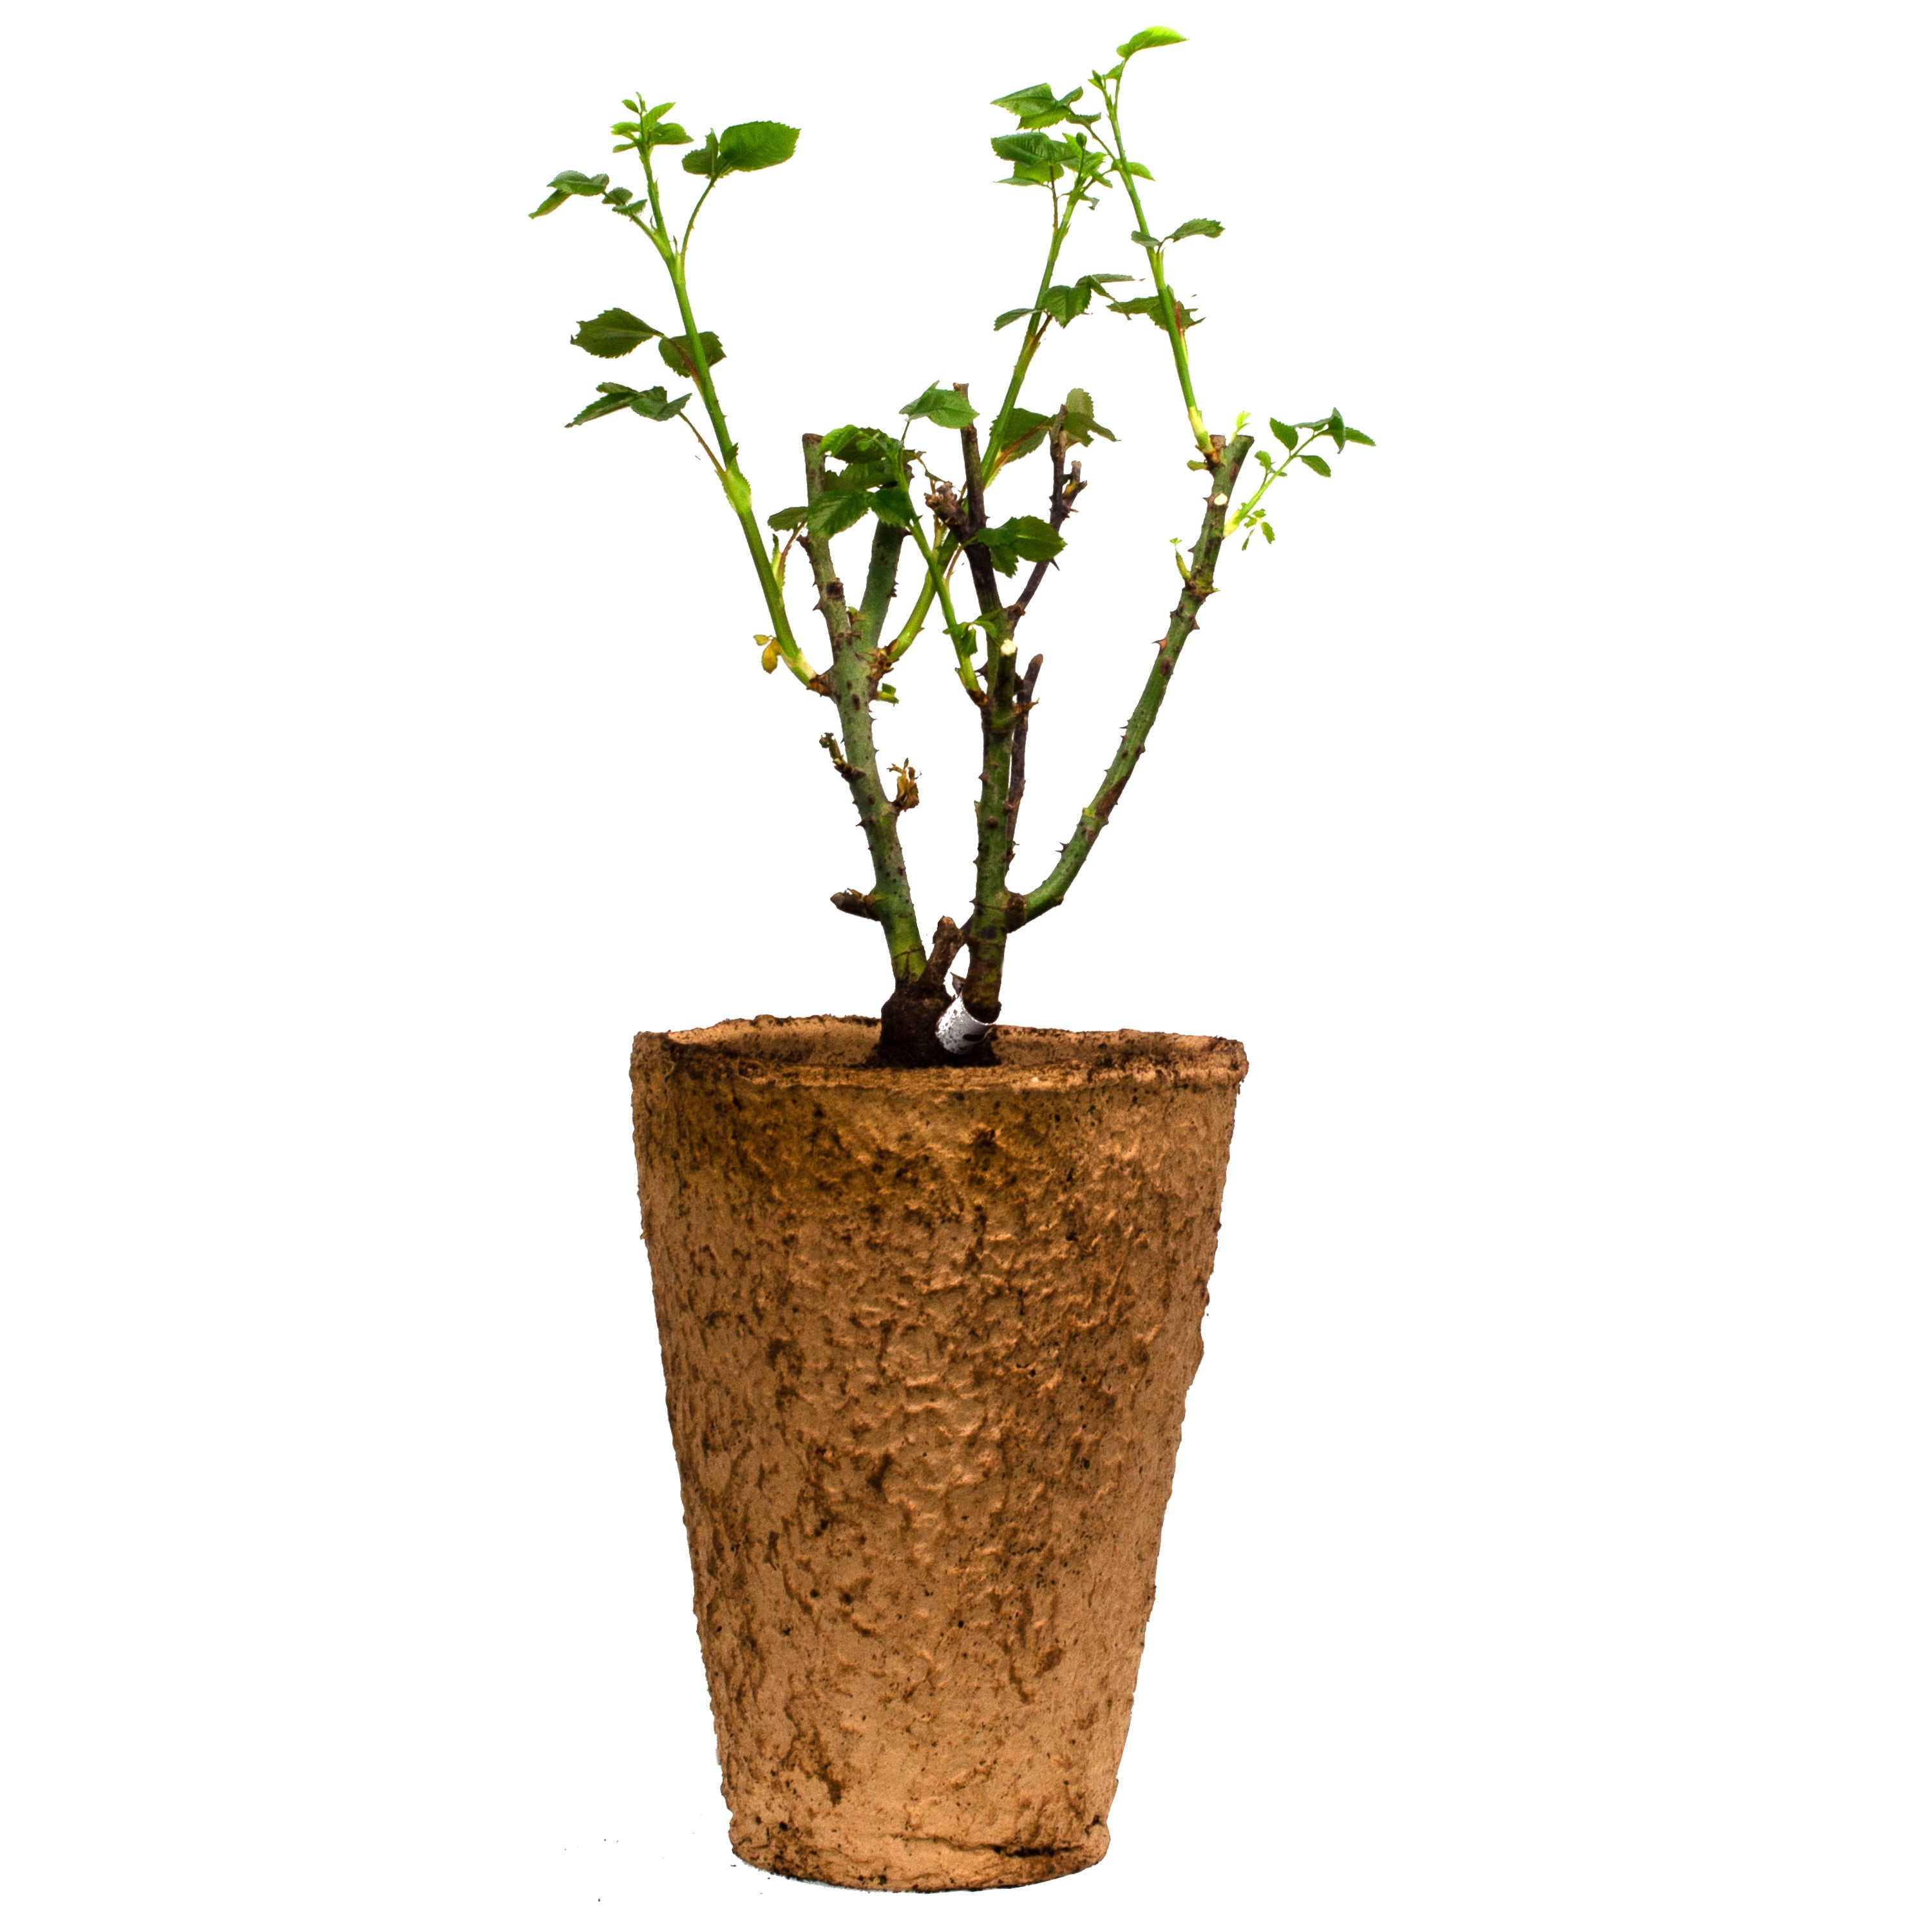 Easy Does It Rose 1.5 gallon Pot - FREE SHIPPING